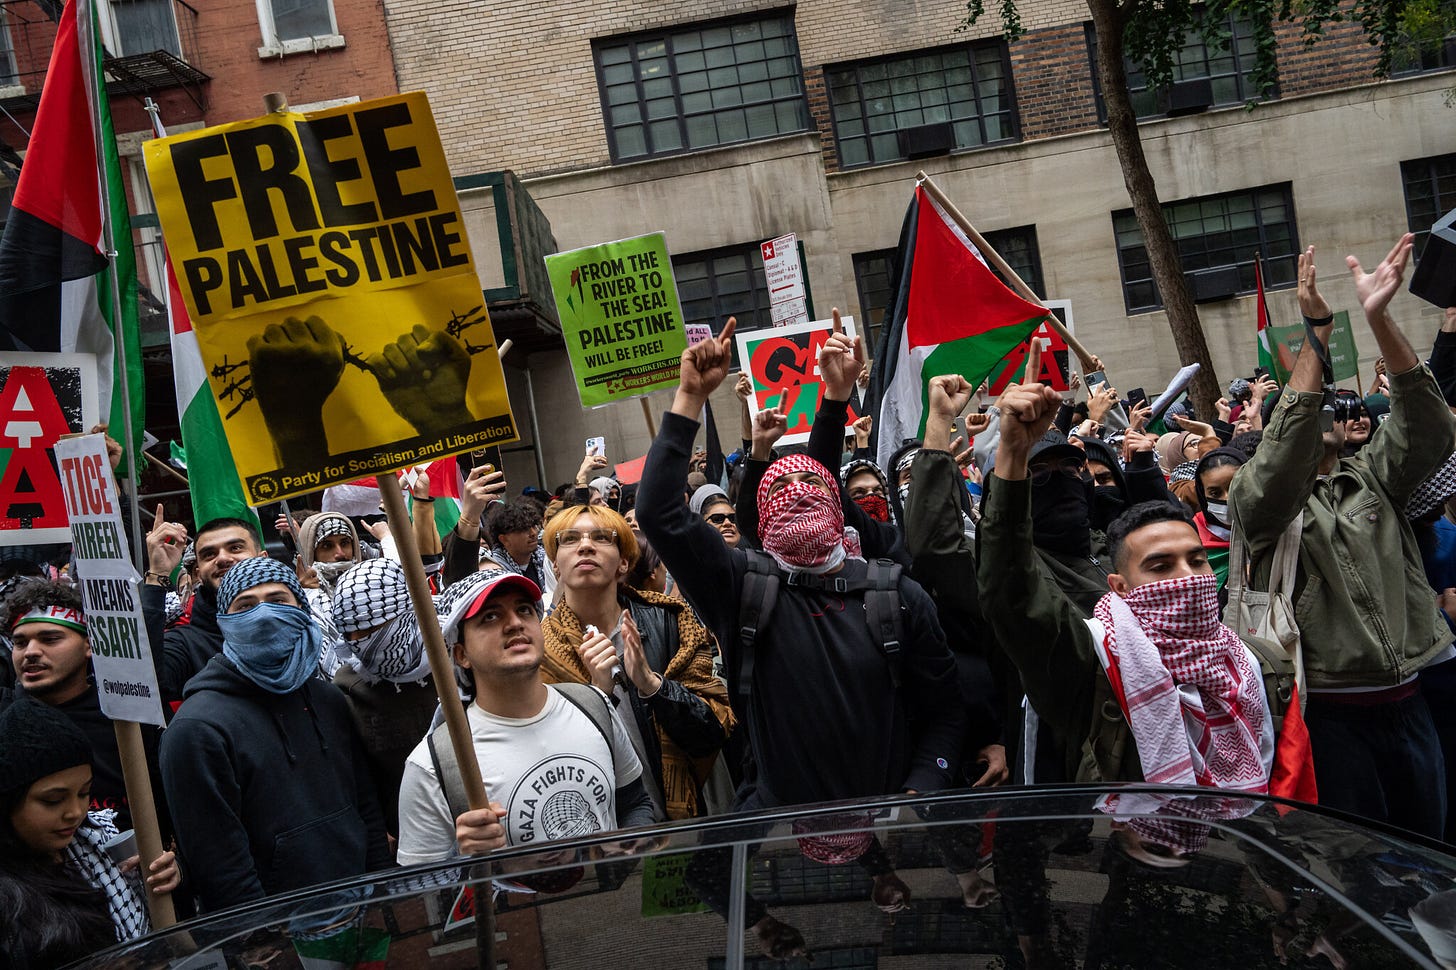 Israel go to hell': Pro-Palestinian activists rally in New York for 2nd day  | The Times of Israel